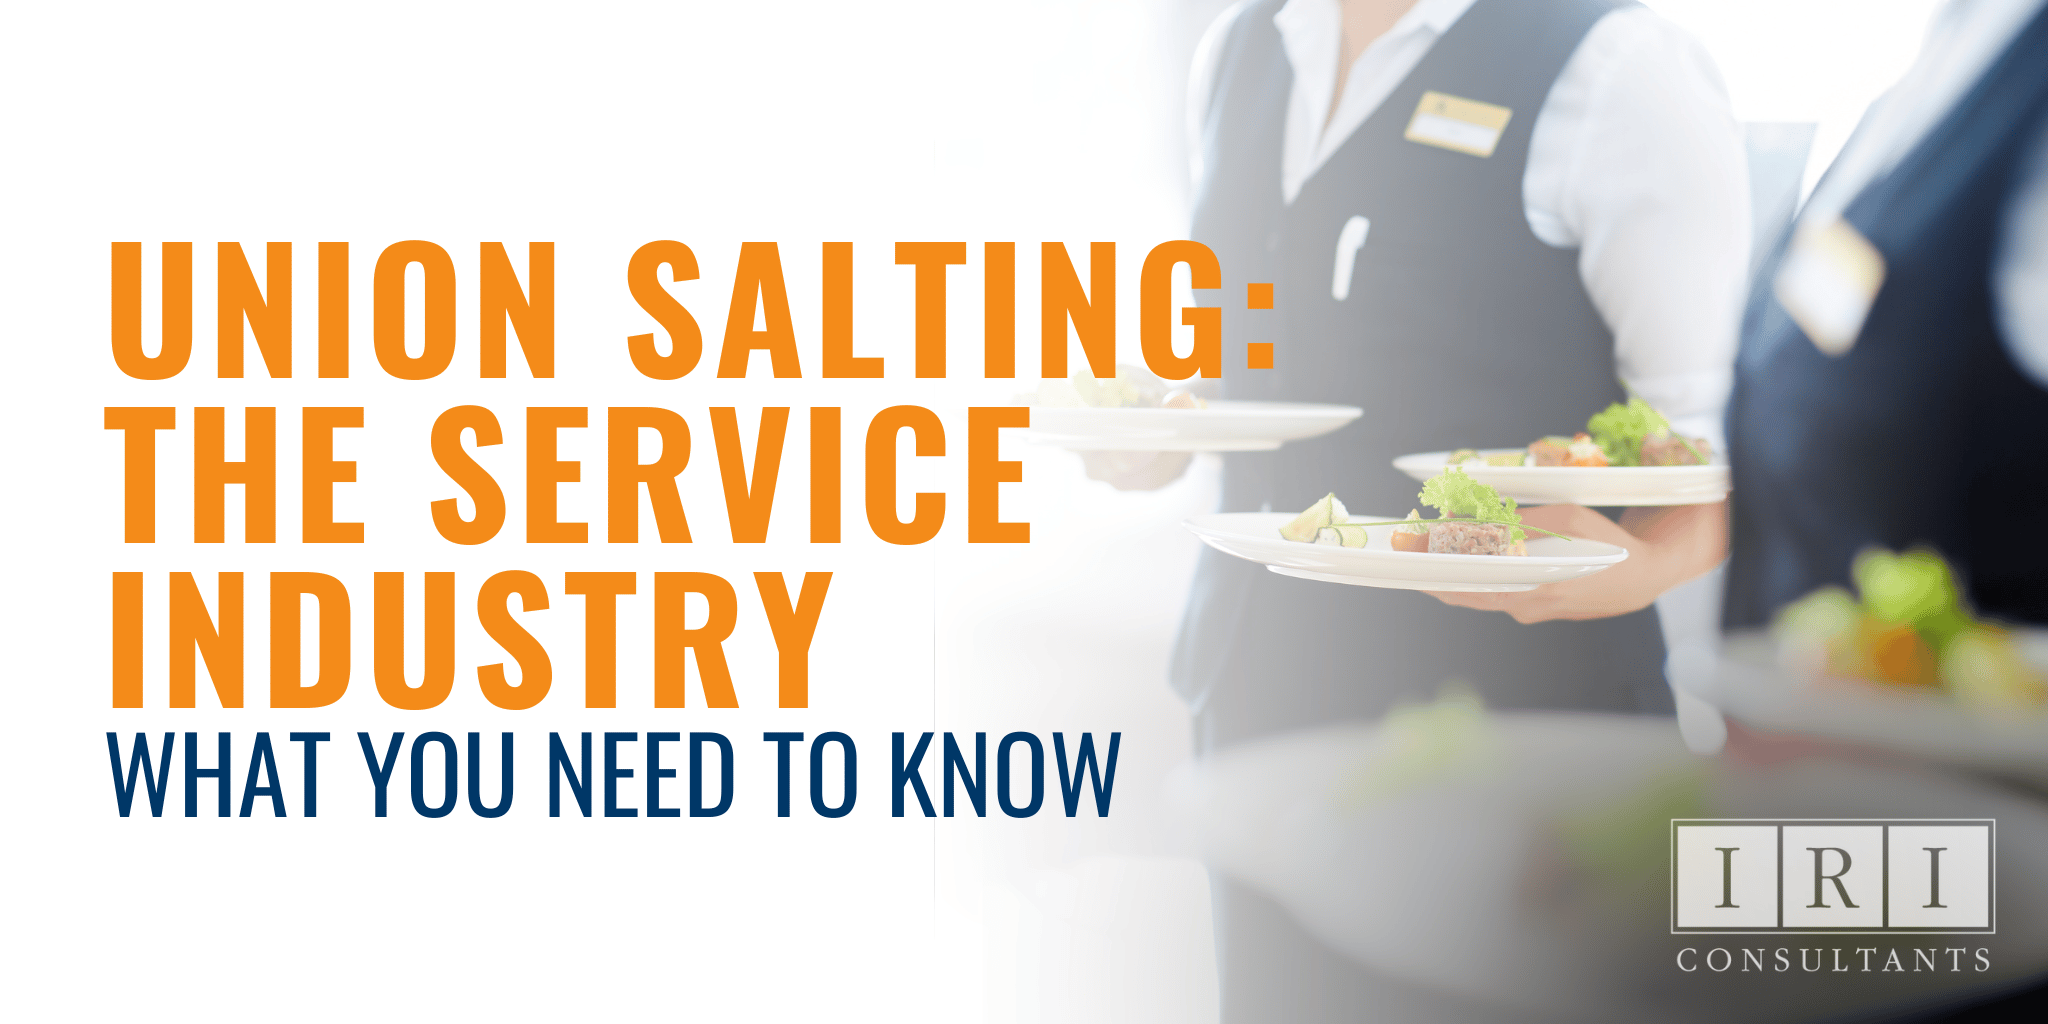 Union Salting The Service Industry - What You Need To Know